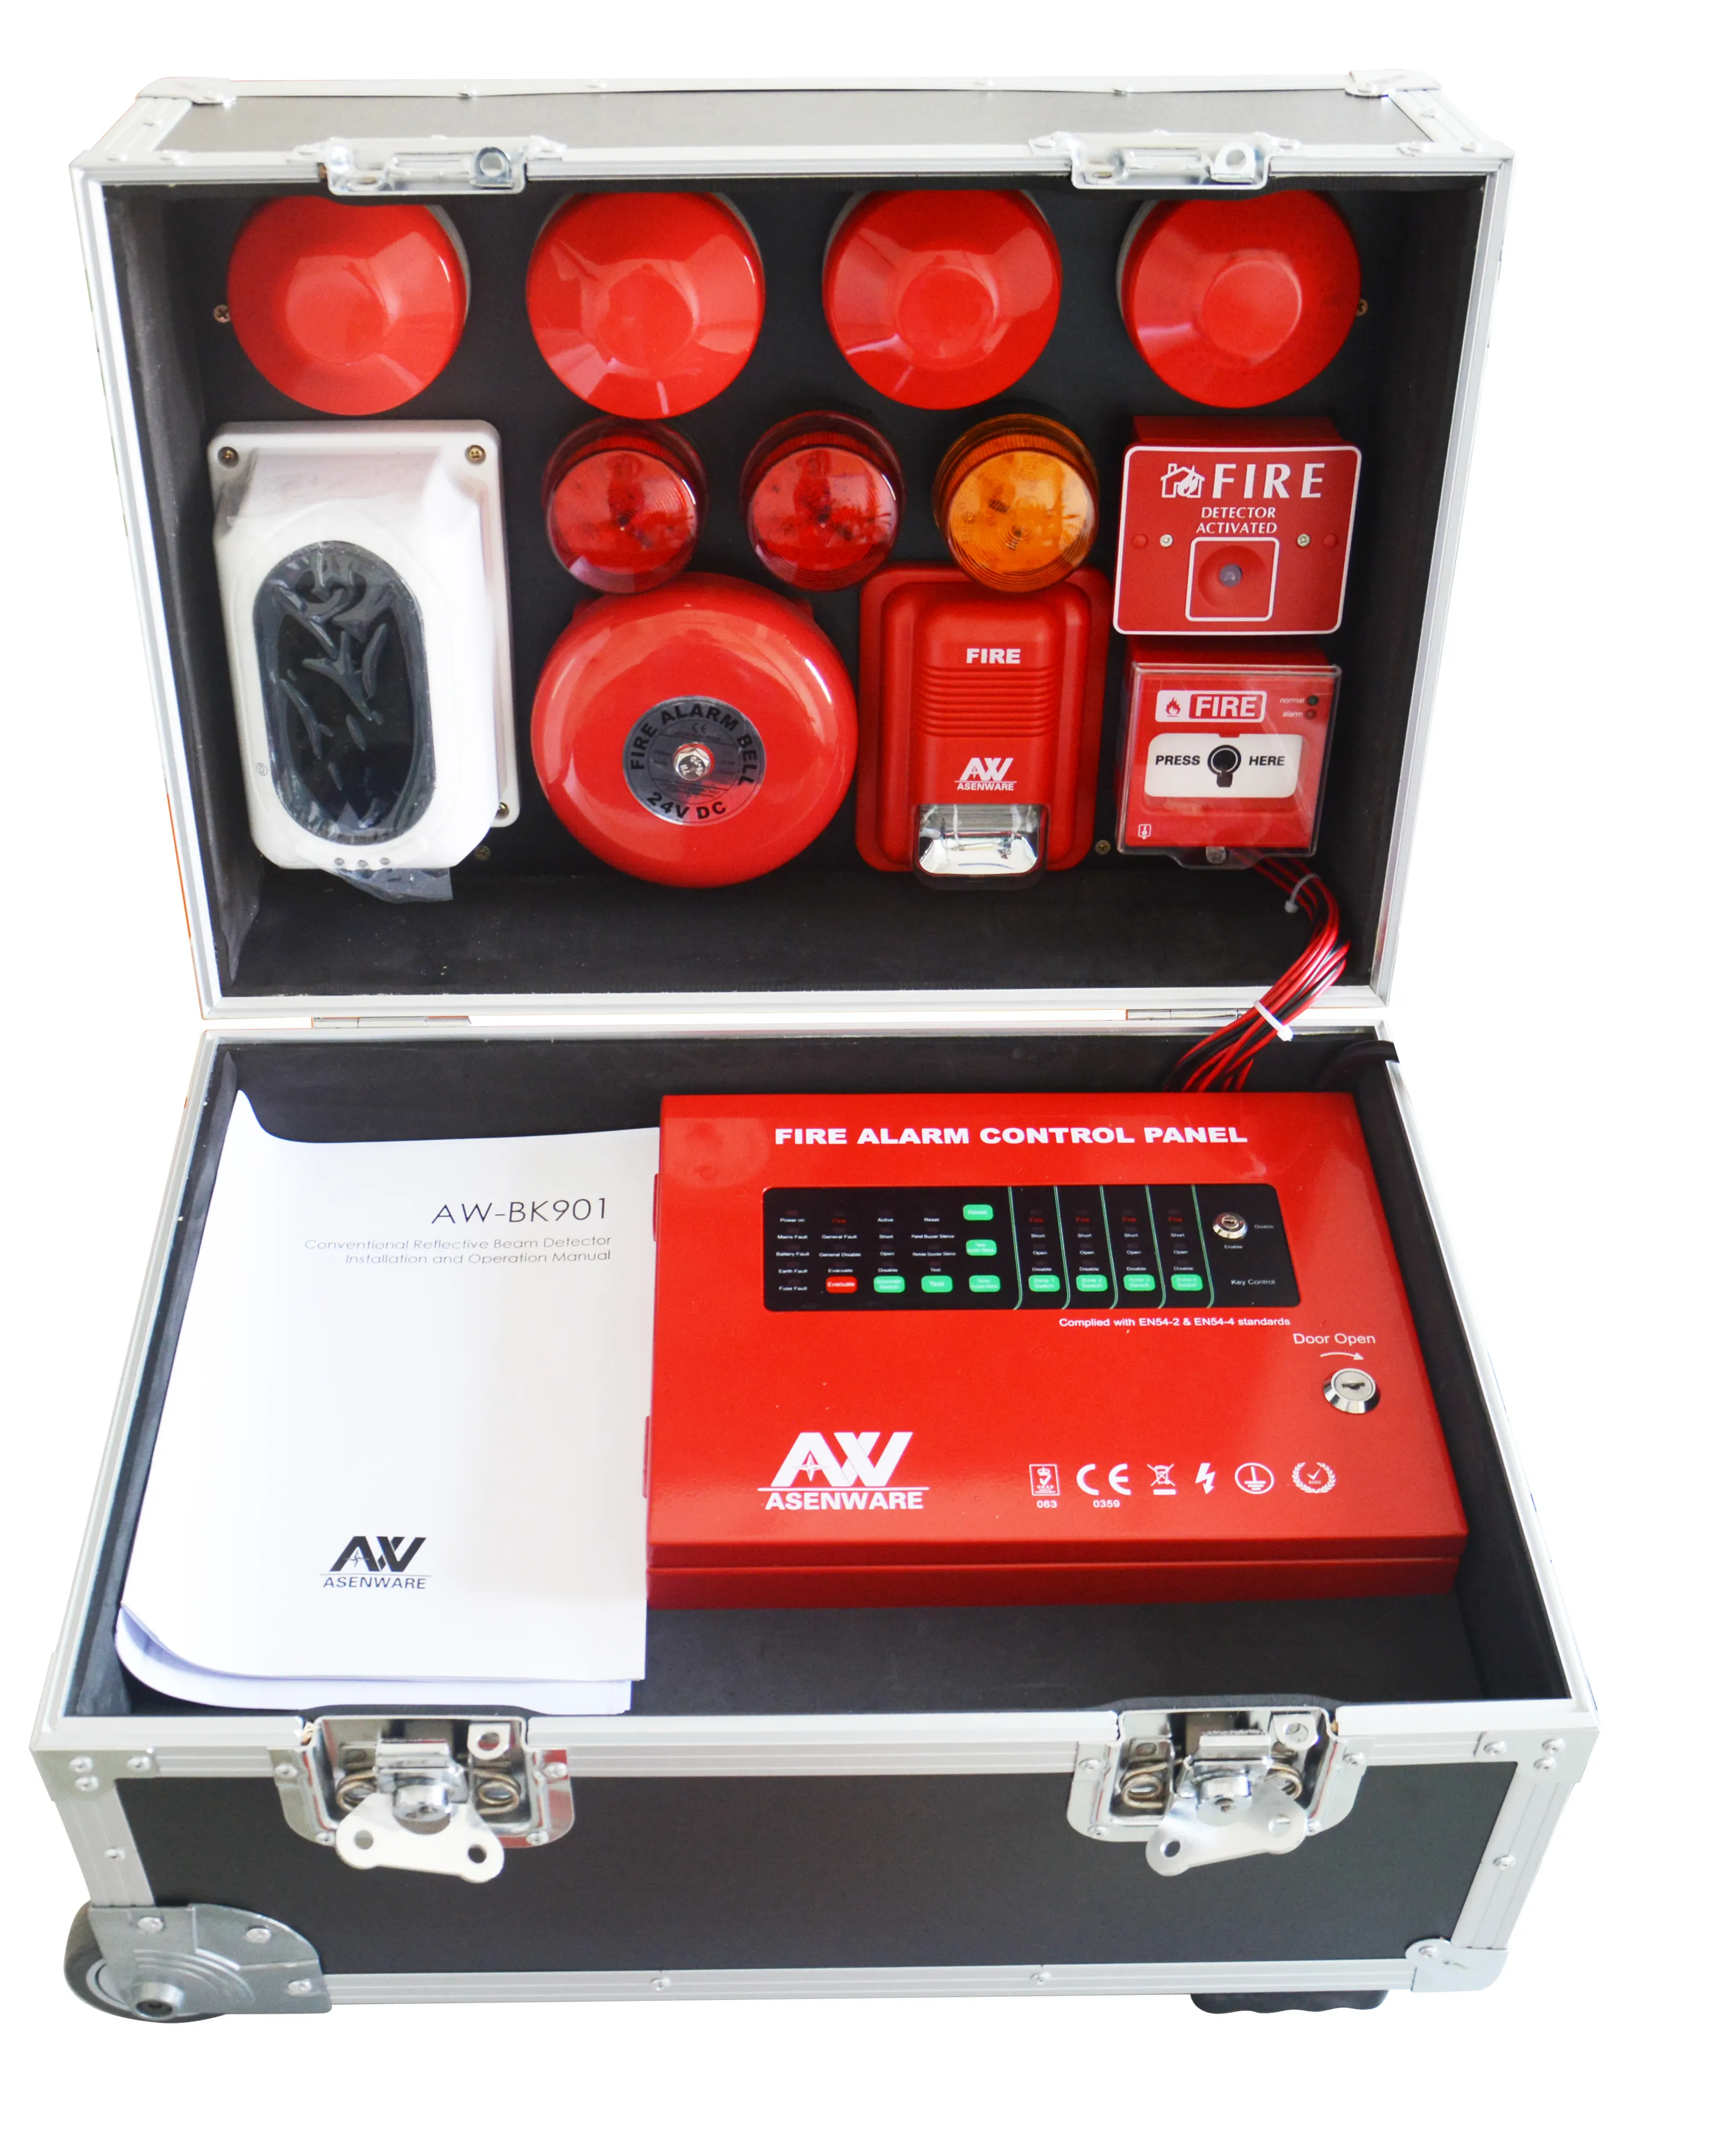 Factory Conventional Fire Alarm Control System Demo Box 1-32 Zone Fire Alarm Control Panel